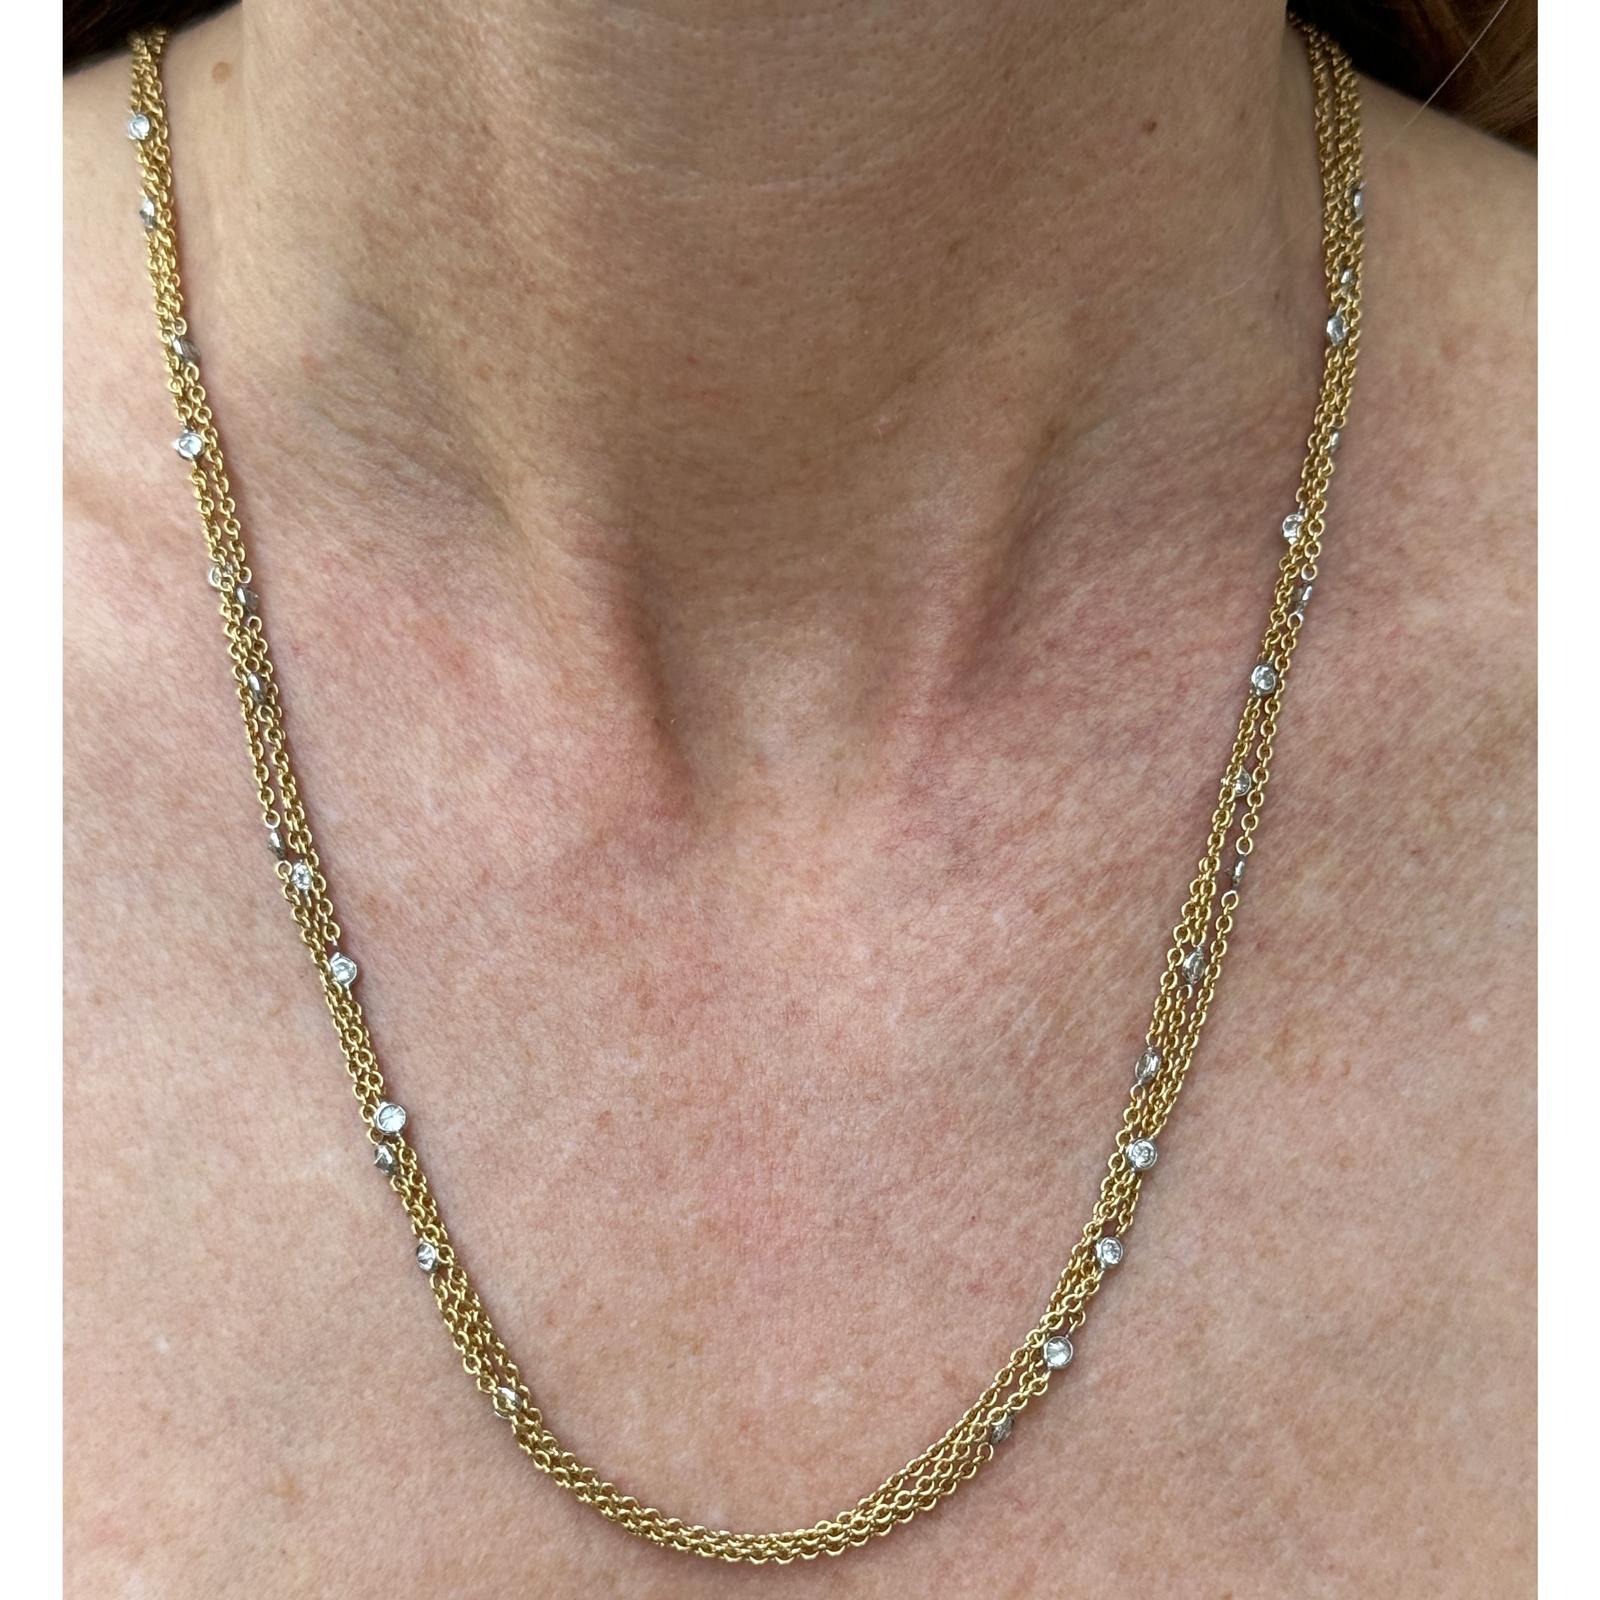 Beautiful multi strand diamond by the yard necklace crafted in 18 karat yellow gold. The necklace features multiple link chains bezel set with 28 round brilliant cut diamonds weighing approximately 1.40 carat total weight. The diamonds are graded